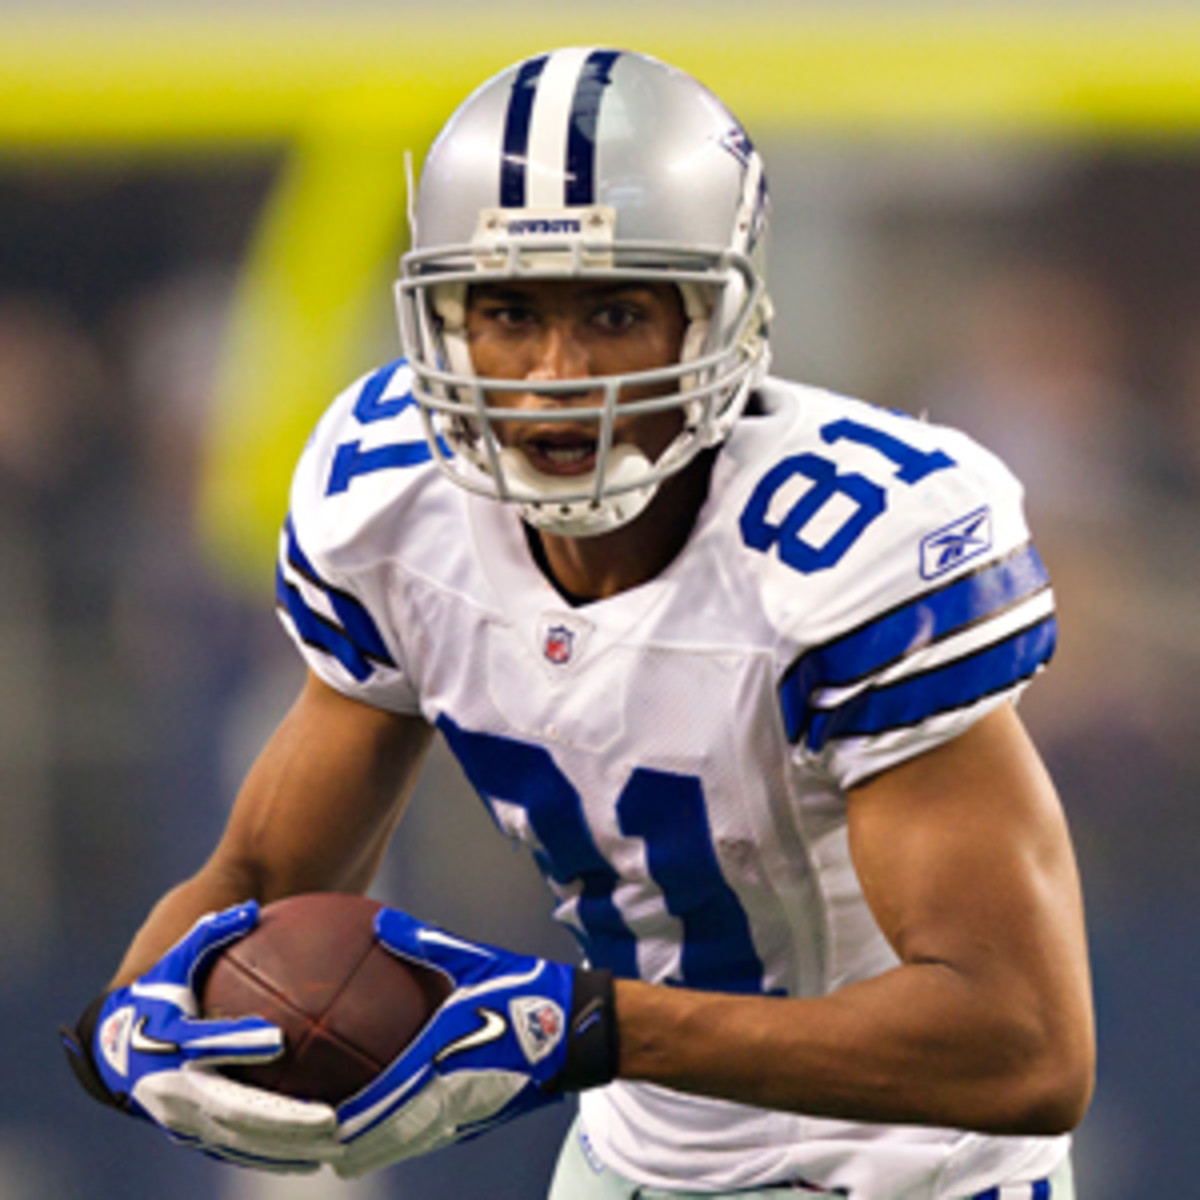 Laurent Robinson had his best season as a Cowboy in 2011. (Wesley Hitt/Getty Images)